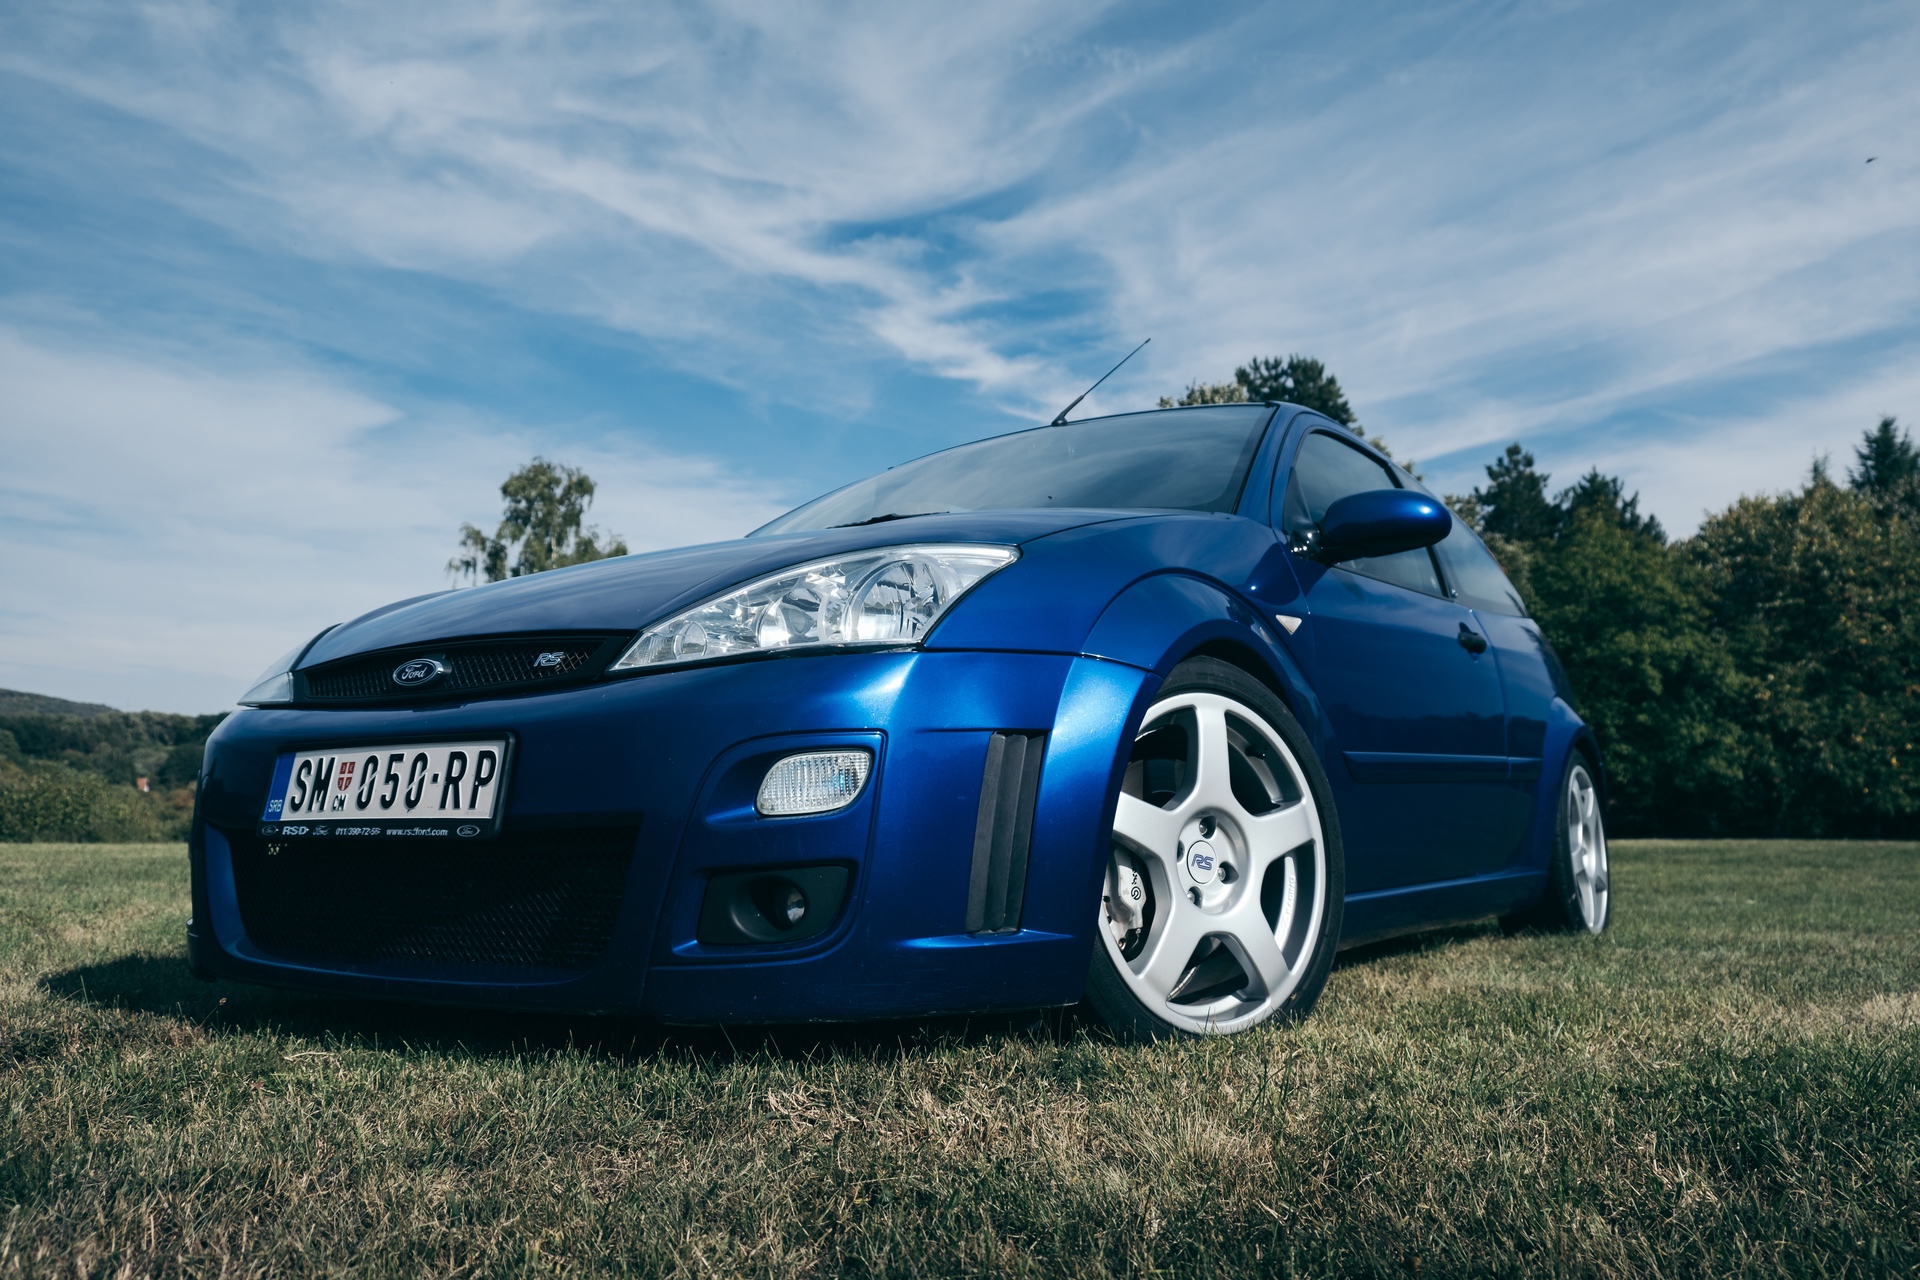 Front and left side view of blue Ford Focus RS in field near forest